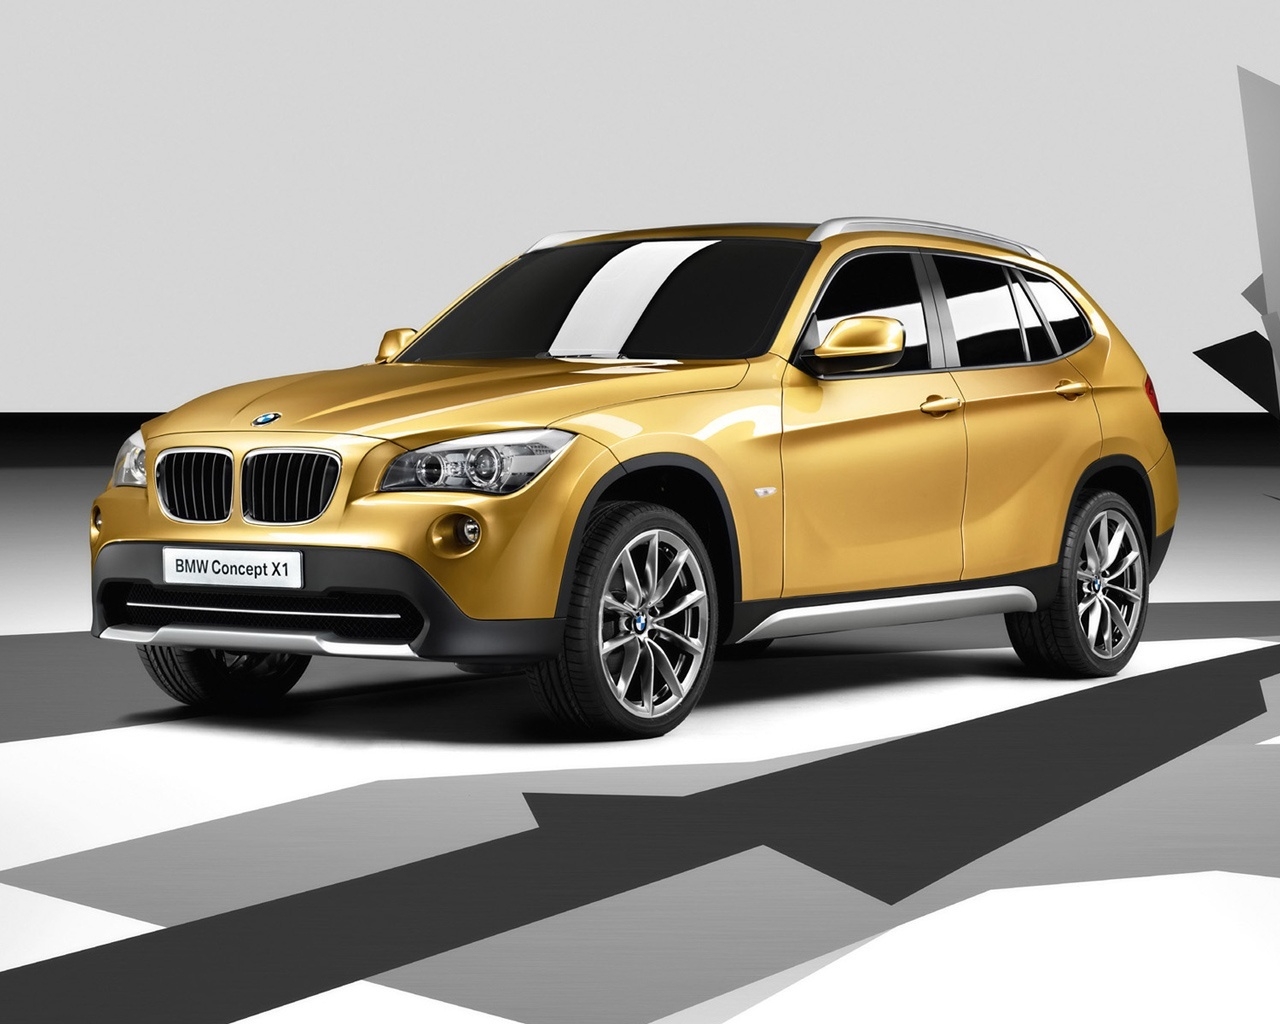 BMW Concept X1 2008 for 1280 x 1024 resolution